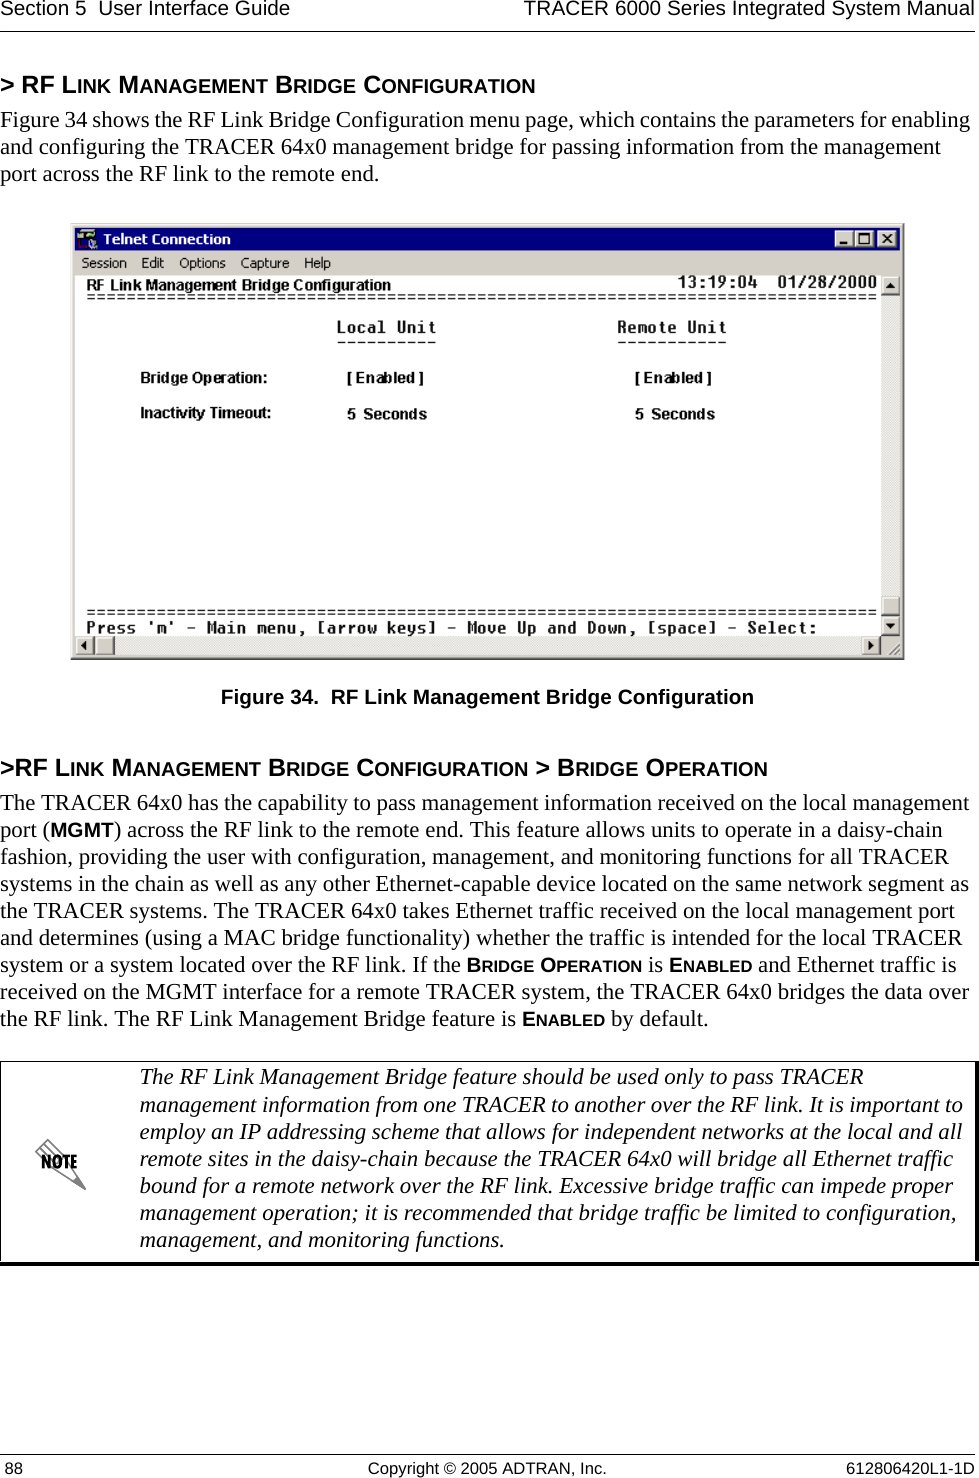 Section 5  User Interface Guide TRACER 6000 Series Integrated System Manual 88 Copyright © 2005 ADTRAN, Inc. 612806420L1-1D&gt; RF LINK MANAGEMENT BRIDGE CONFIGURATIONFigure 34 shows the RF Link Bridge Configuration menu page, which contains the parameters for enabling and configuring the TRACER 64x0 management bridge for passing information from the management port across the RF link to the remote end. Figure 34.  RF Link Management Bridge Configuration&gt;RF LINK MANAGEMENT BRIDGE CONFIGURATION &gt; BRIDGE OPERATIONThe TRACER 64x0 has the capability to pass management information received on the local management port (MGMT) across the RF link to the remote end. This feature allows units to operate in a daisy-chain fashion, providing the user with configuration, management, and monitoring functions for all TRACER systems in the chain as well as any other Ethernet-capable device located on the same network segment as the TRACER systems. The TRACER 64x0 takes Ethernet traffic received on the local management port and determines (using a MAC bridge functionality) whether the traffic is intended for the local TRACER system or a system located over the RF link. If the BRIDGE OPERATION is ENABLED and Ethernet traffic is received on the MGMT interface for a remote TRACER system, the TRACER 64x0 bridges the data over the RF link. The RF Link Management Bridge feature is ENABLED by default.The RF Link Management Bridge feature should be used only to pass TRACER management information from one TRACER to another over the RF link. It is important to employ an IP addressing scheme that allows for independent networks at the local and all remote sites in the daisy-chain because the TRACER 64x0 will bridge all Ethernet traffic bound for a remote network over the RF link. Excessive bridge traffic can impede proper management operation; it is recommended that bridge traffic be limited to configuration, management, and monitoring functions.